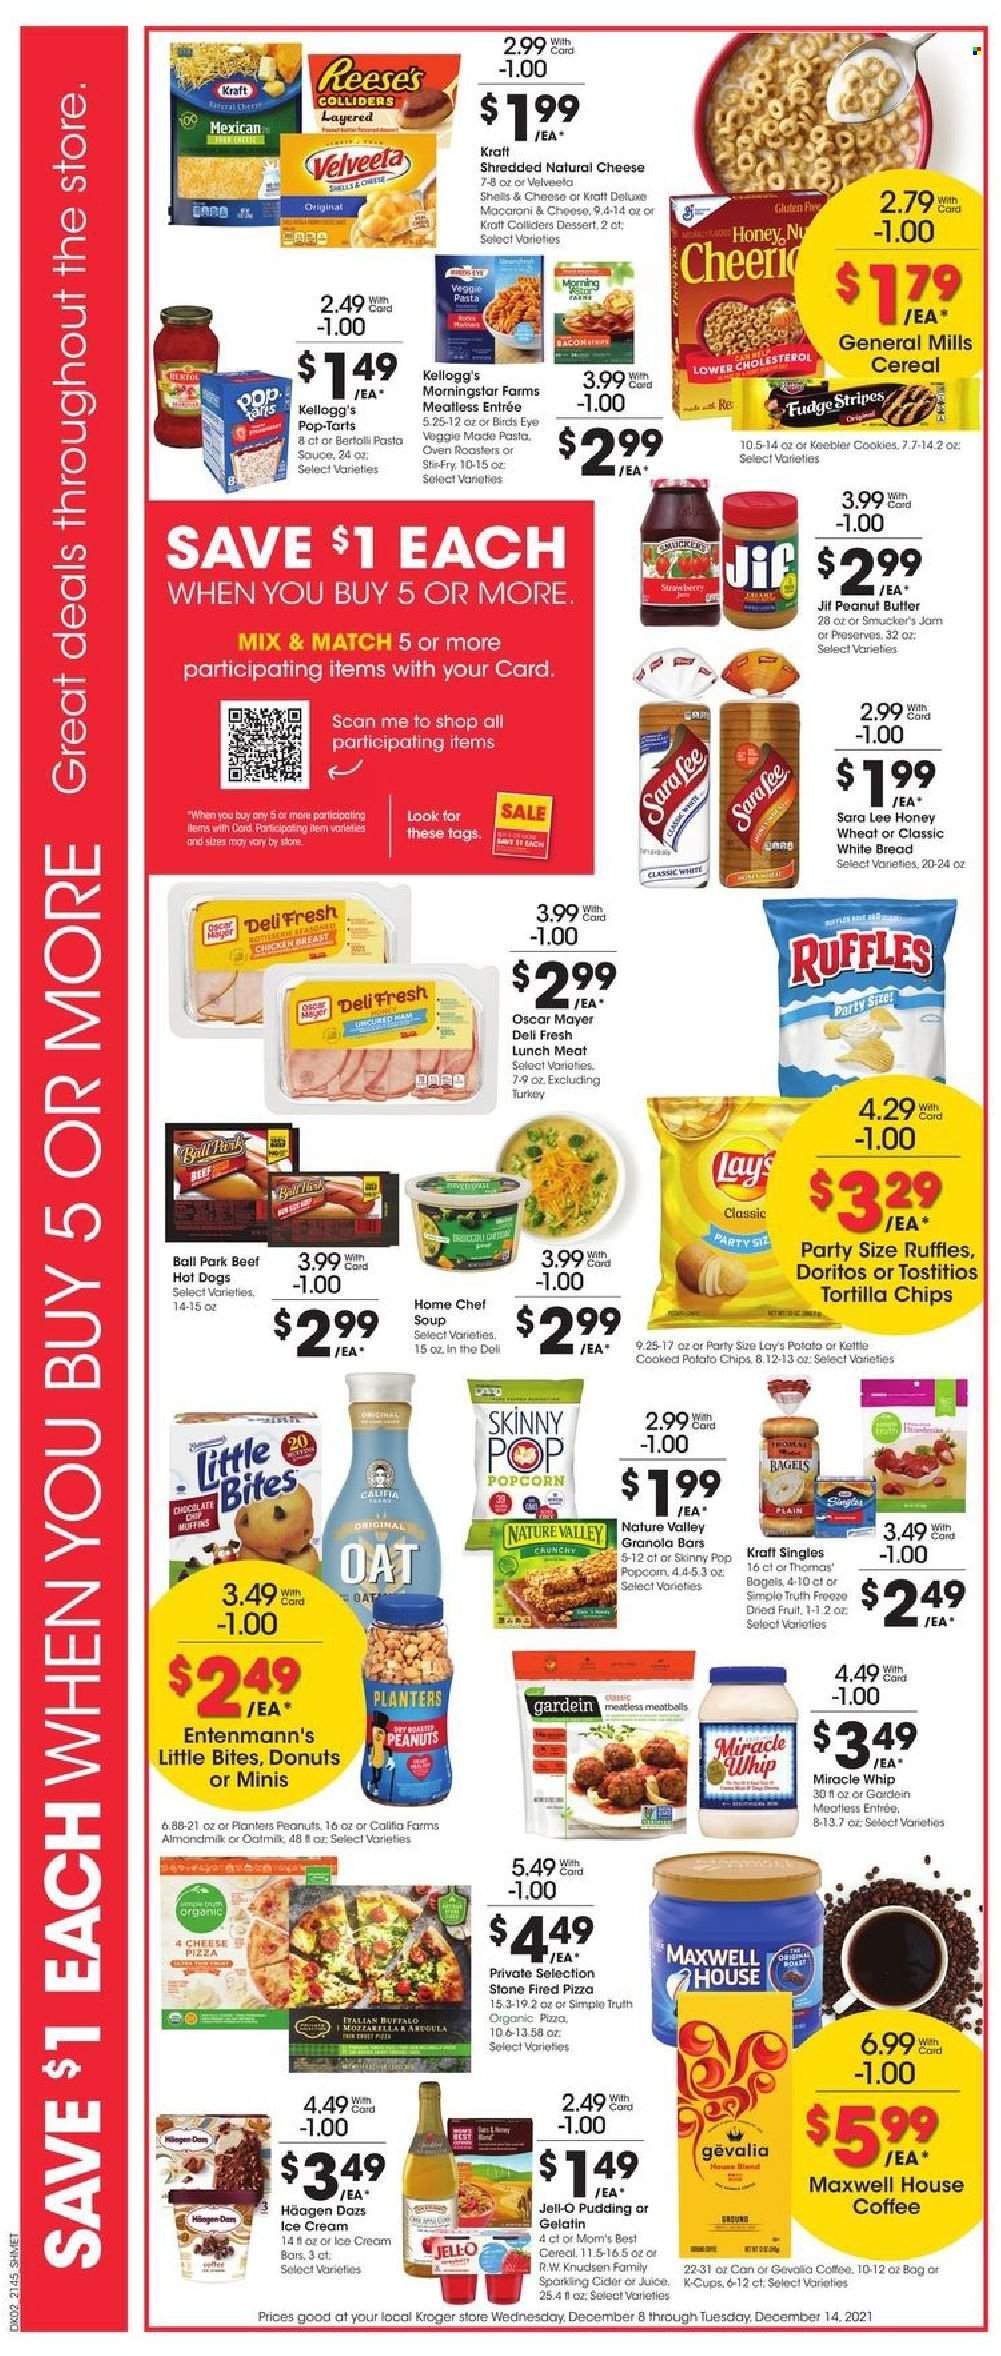 thumbnail - Kroger Flyer - 12/08/2021 - 12/14/2021 - Sales products - bagels, bread, white bread, Sara Lee, donut, Entenmann's, hot dog, pizza, pasta sauce, meatballs, macaroni, soup, Bird's Eye, MorningStar Farms, Kraft®, Oscar Mayer, lunch meat, sandwich slices, Kraft Singles, pudding, almond milk, oat milk, Miracle Whip, ice cream, ice cream bars, Reese's, Häagen-Dazs, cookies, fudge, Kellogg's, Pop-Tarts, Little Bites, Keebler, Doritos, tortilla chips, potato chips, chips, Lay’s, popcorn, Ruffles, Skinny Pop, oats, Jell-O, cereals, granola bar, Mom's Best, Nature Valley, peanut butter, Jif, peanuts, dried fruit, Planters, juice, Maxwell House, coffee, coffee capsules, K-Cups, Gevalia, sparkling cider, sparkling wine, cider, lens, oven, cart. Page 3.